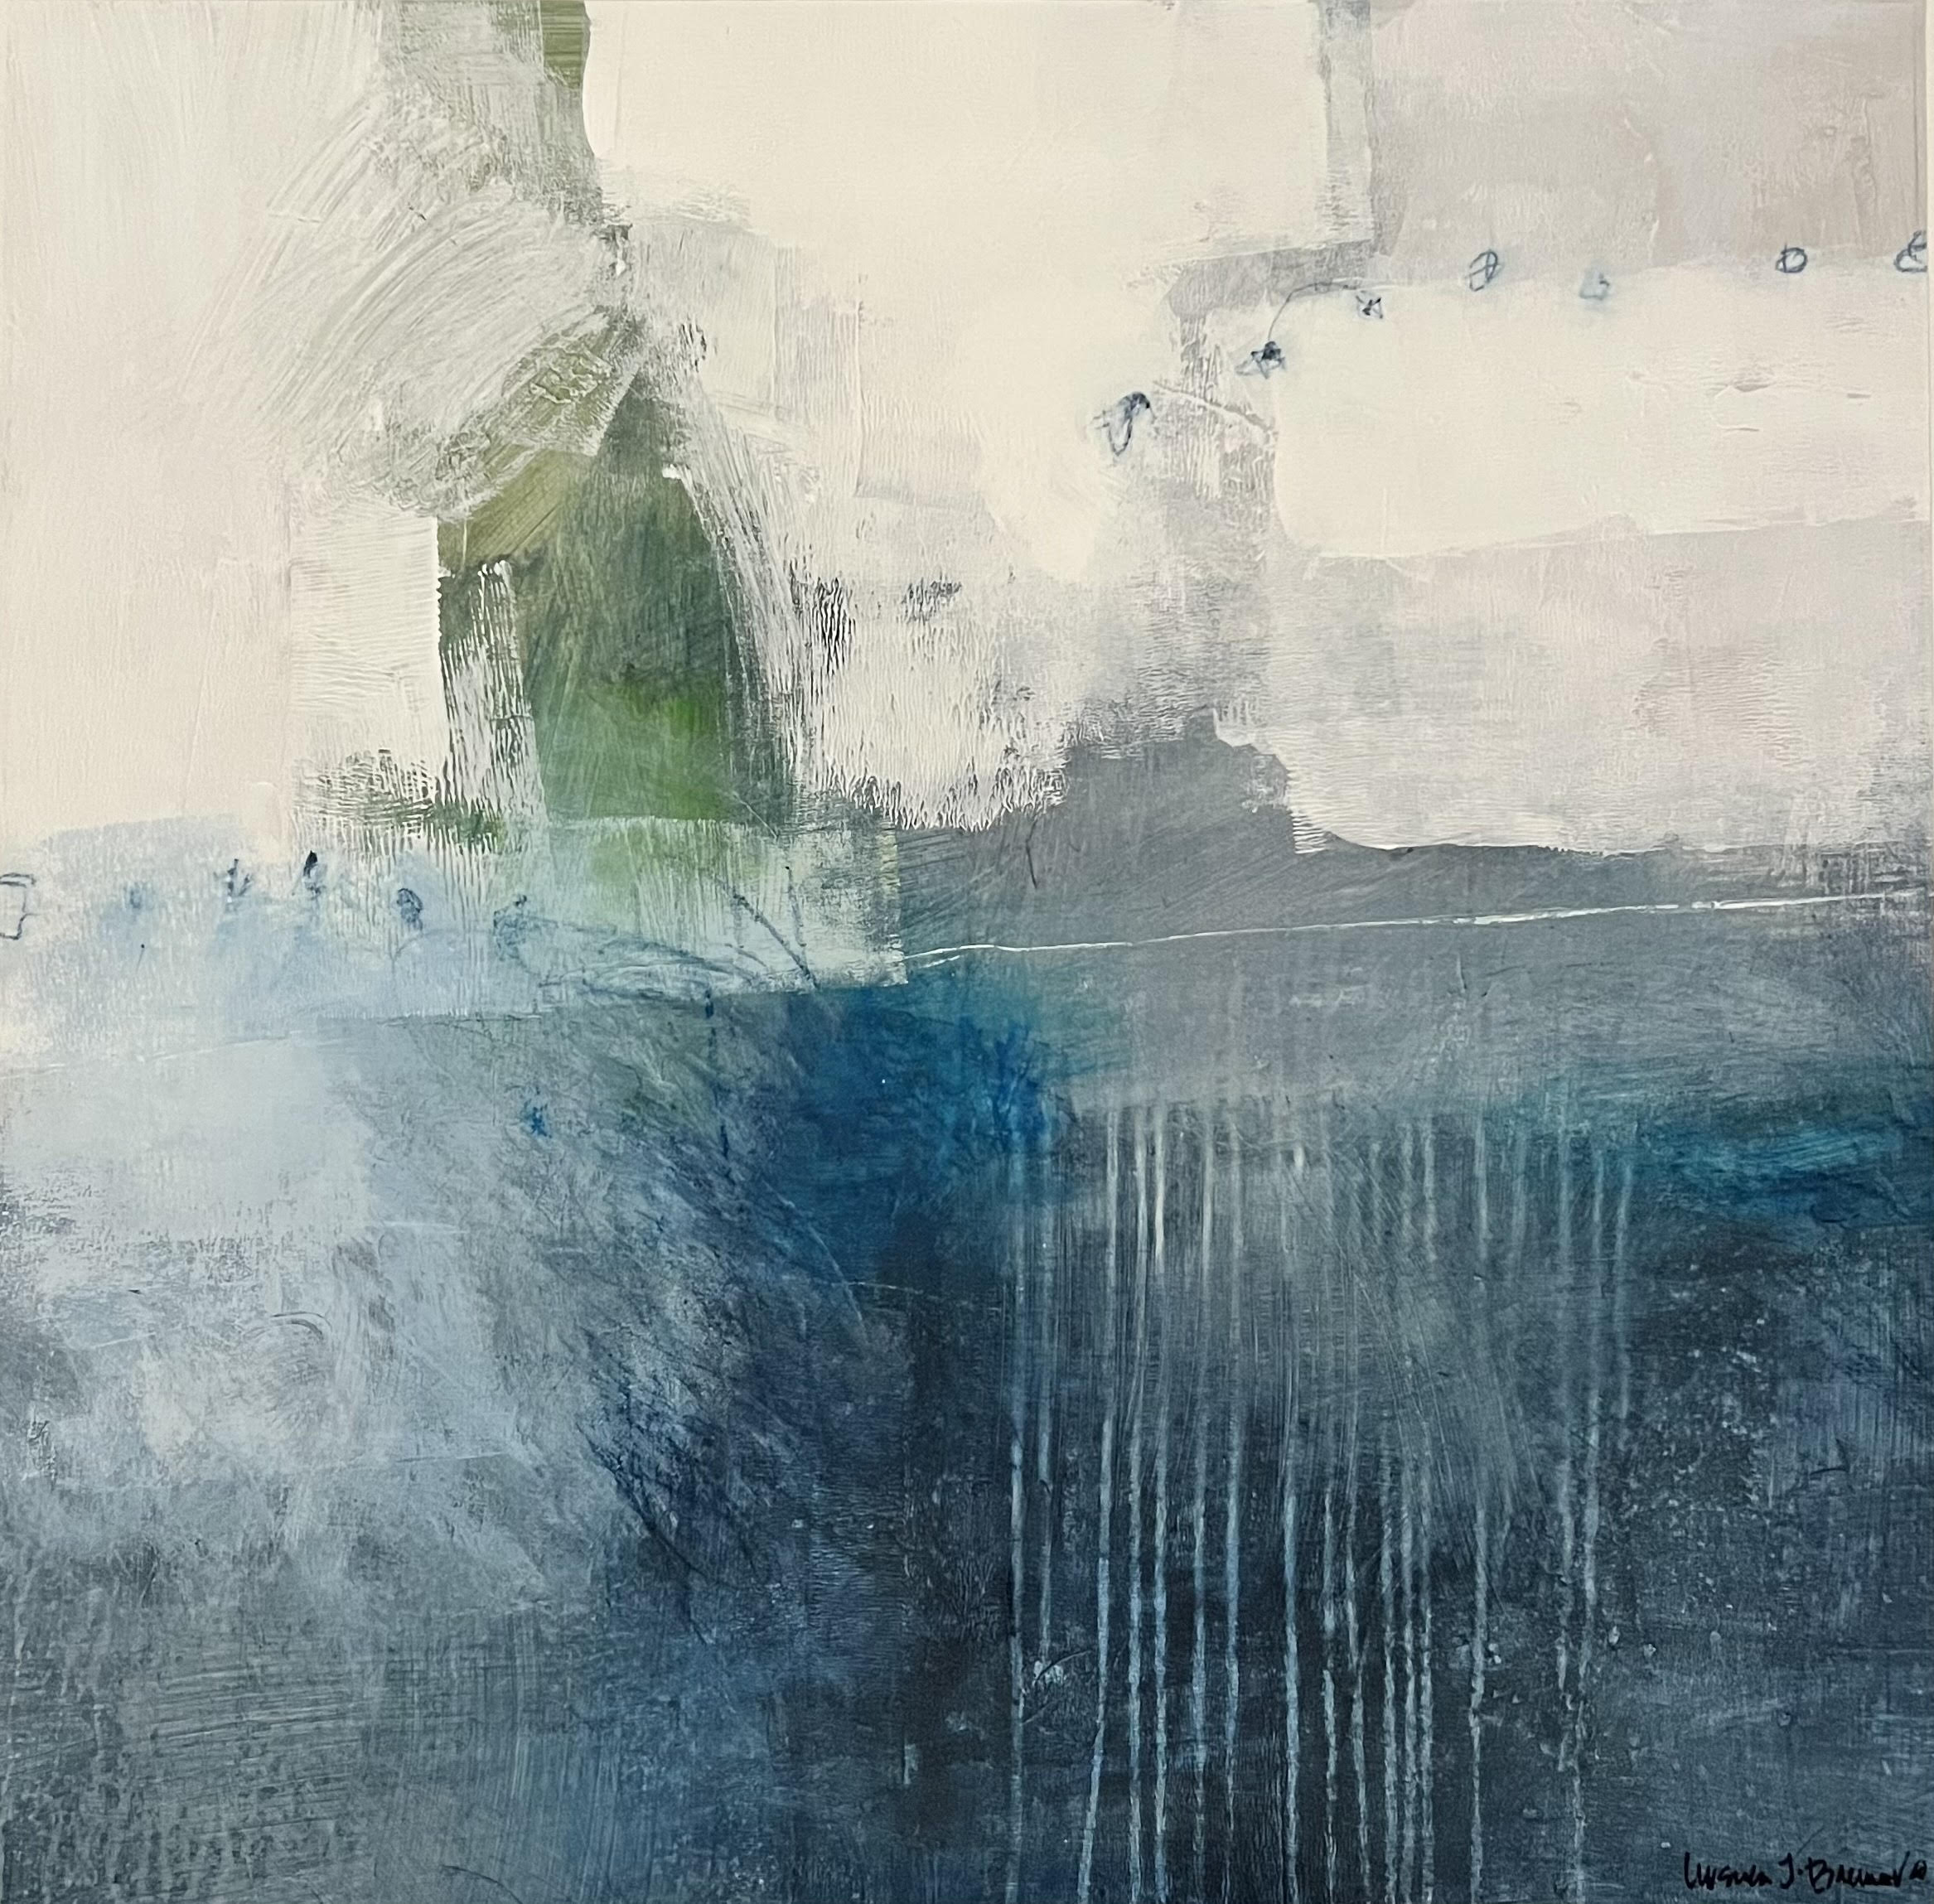 URSULA BRENNER - Blue Haze - Oil on Canvas - 30x30 inches